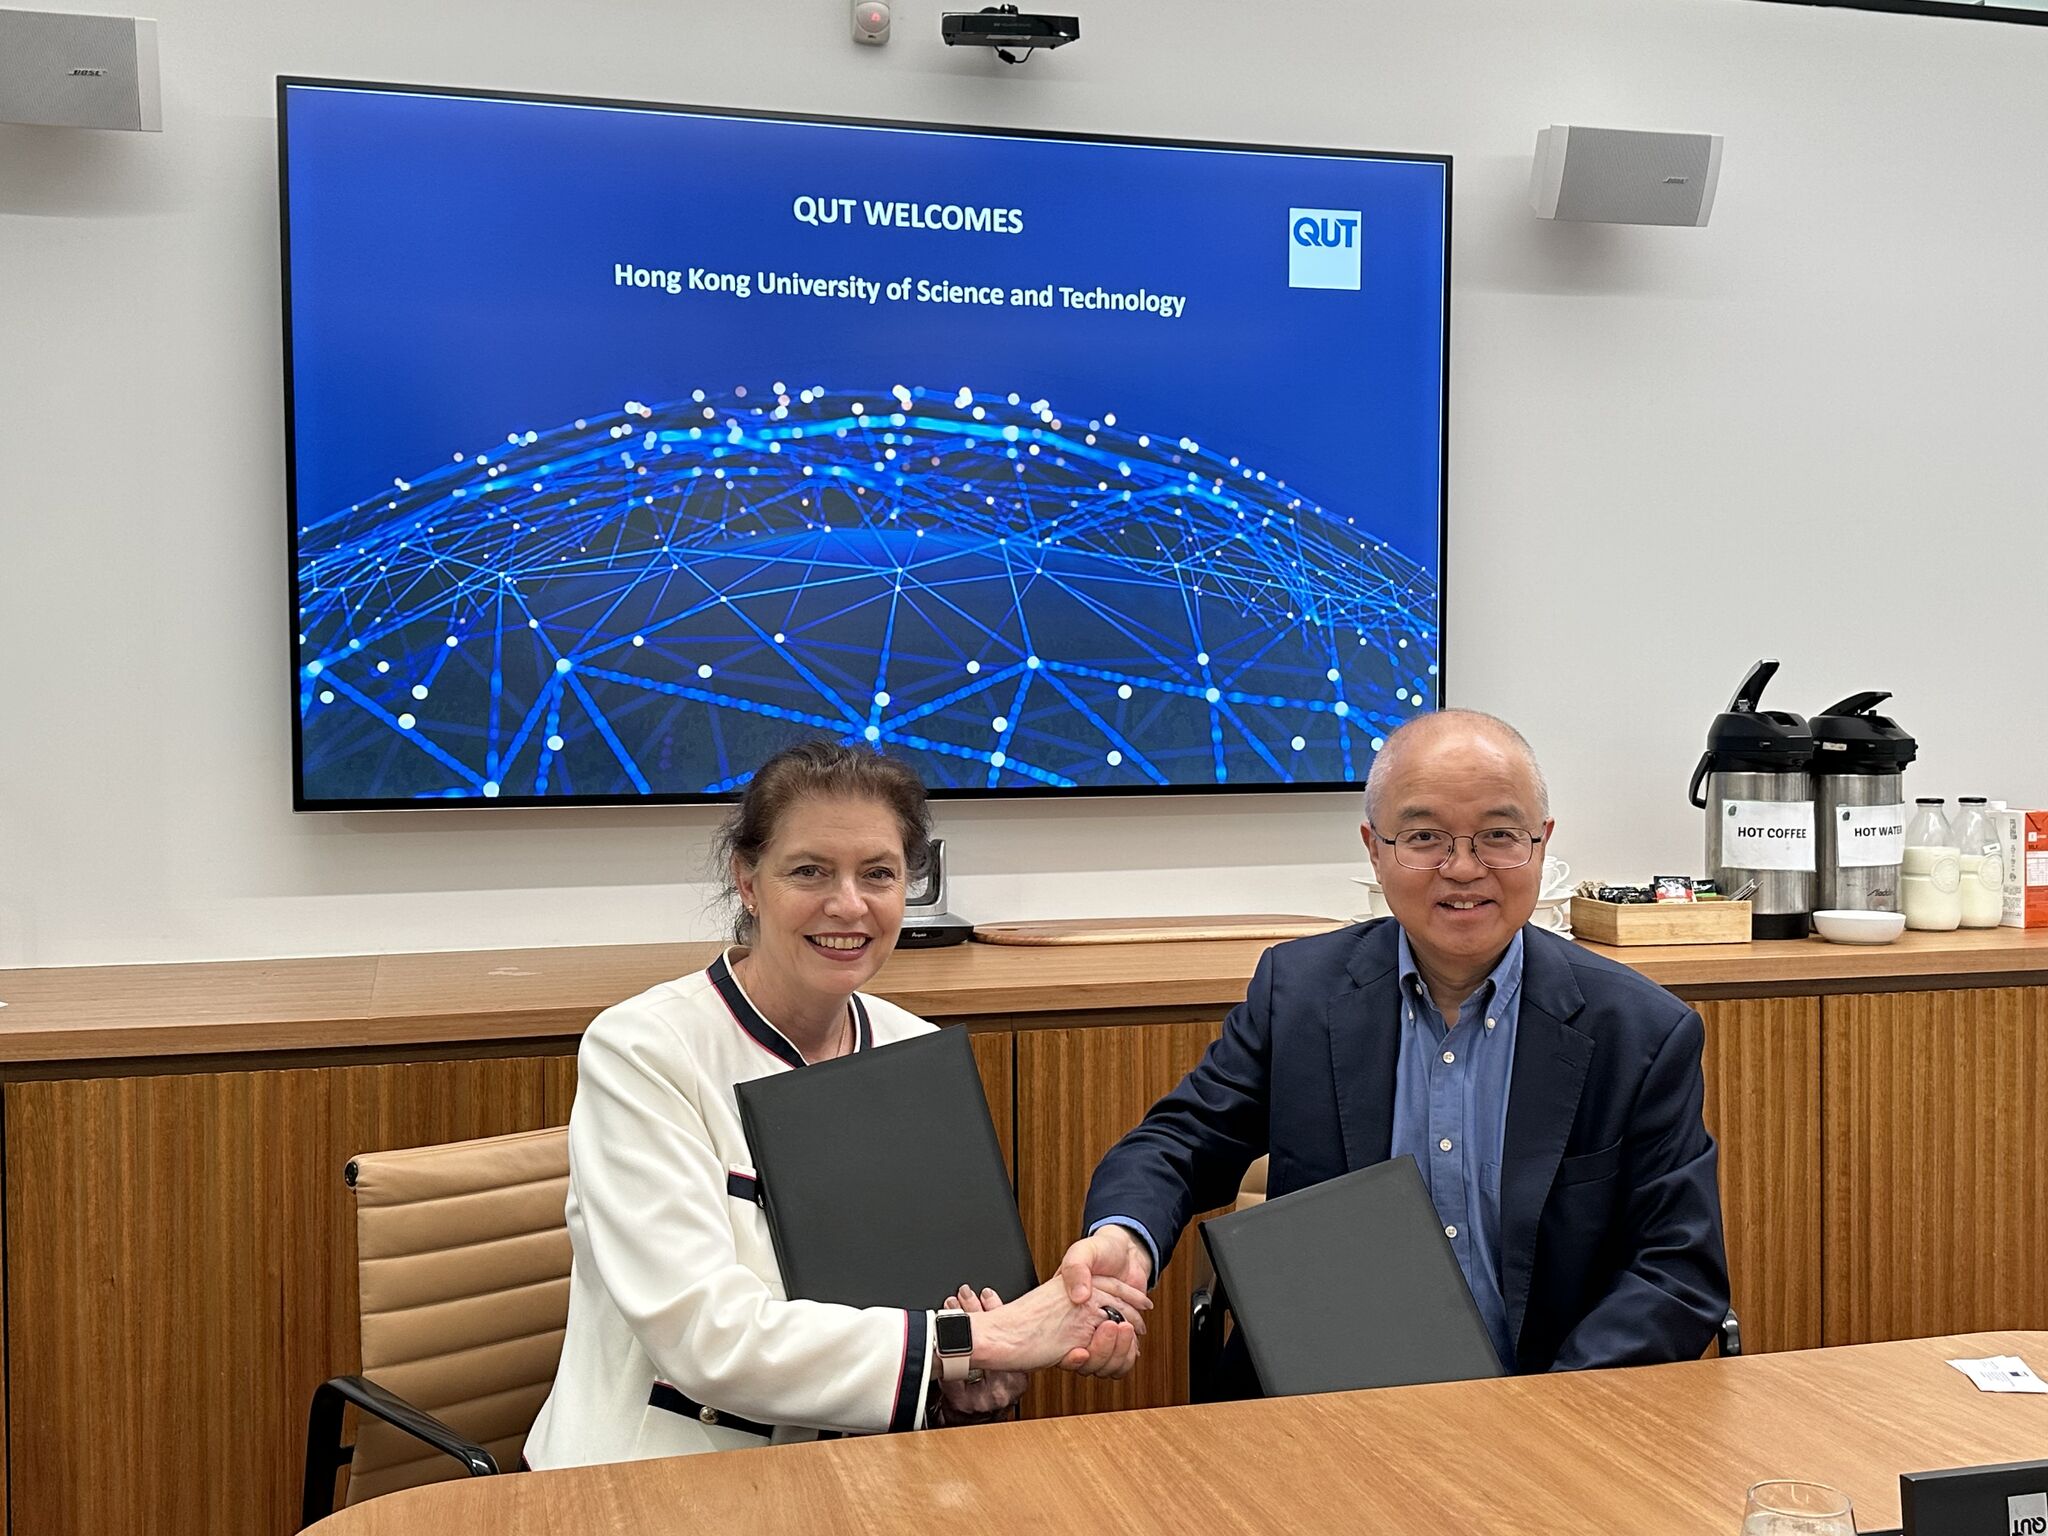 HKUST Vice President for Institutional Advancement Prof. WANG Yang (right) signed the Memorandums of Understanding with Queensland University of Technology.